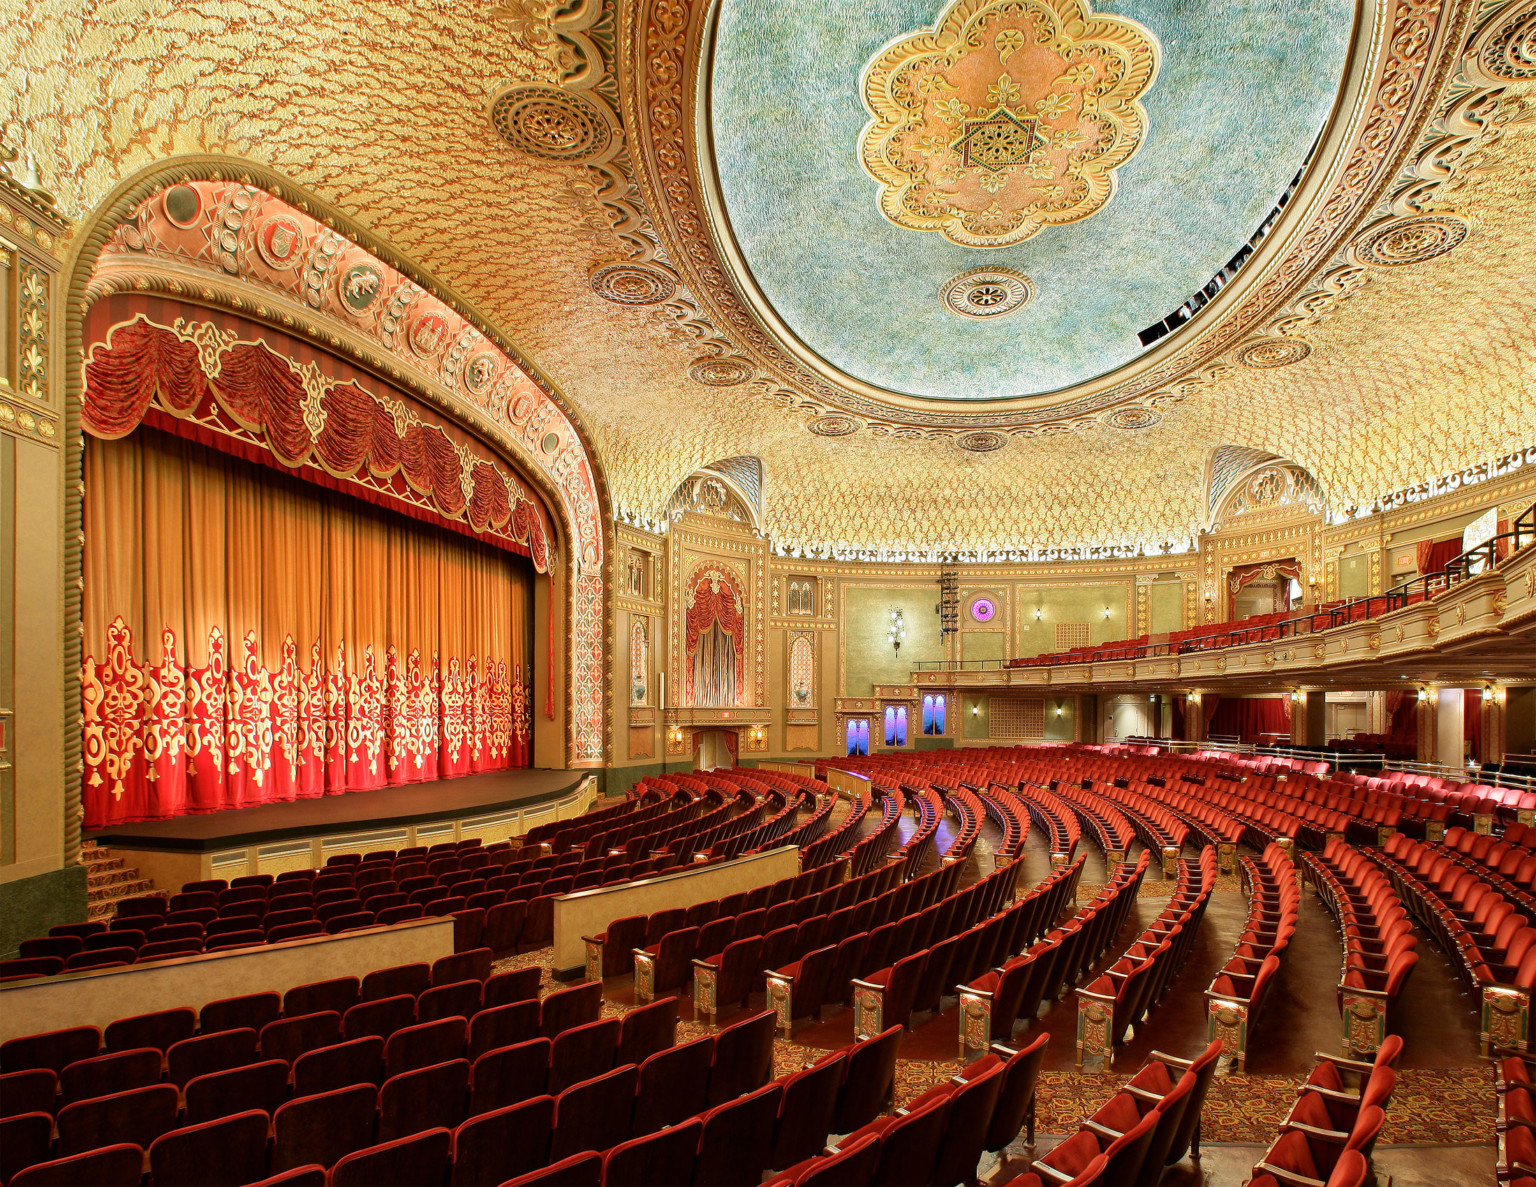 Historic grand theater with red seating, grand ornate archway over stage, red drop curtain, and gold ceiling at the Tennessee Theater